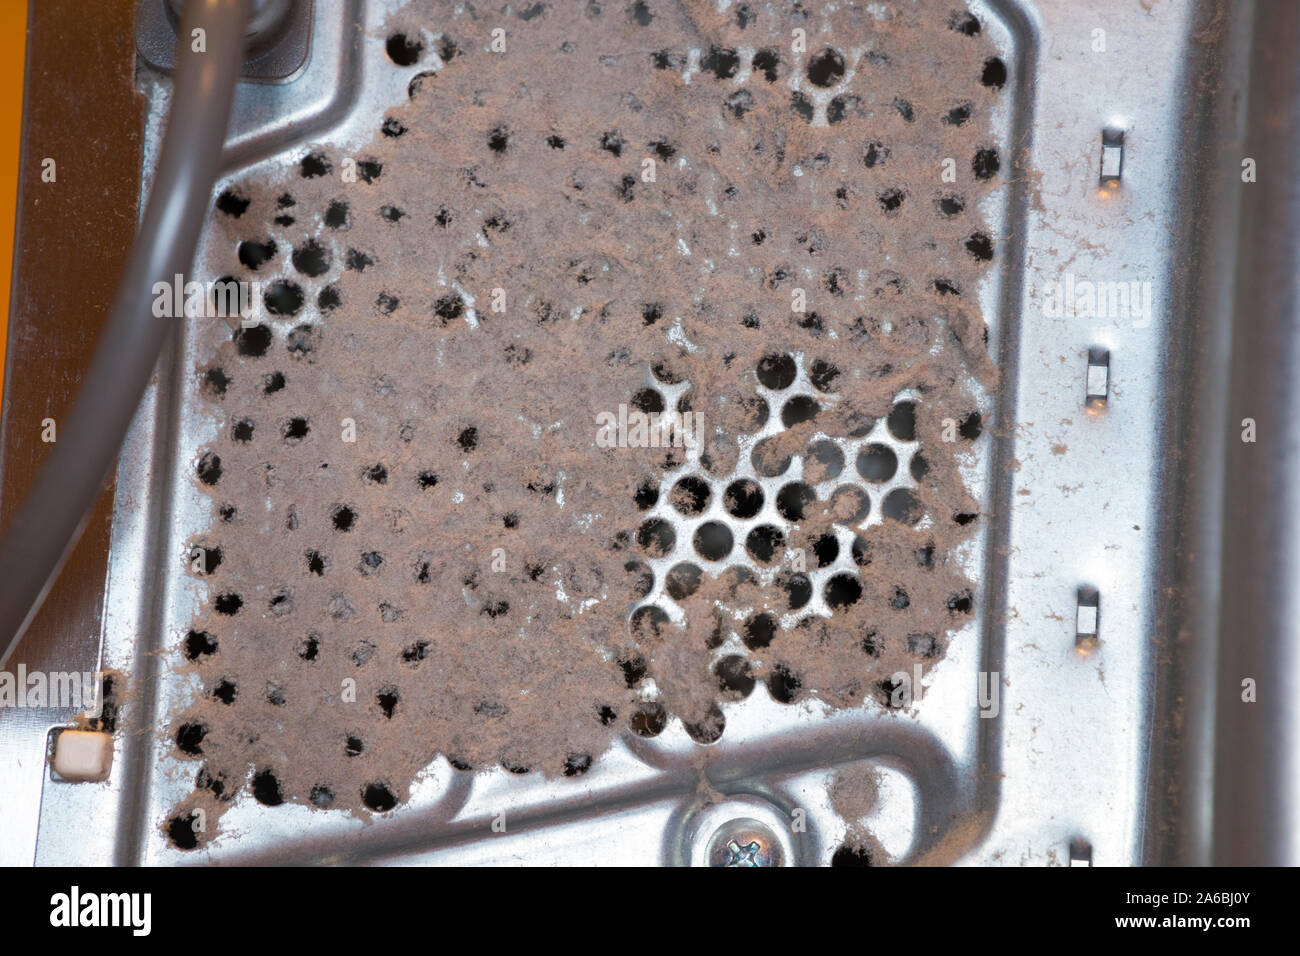 Airborne dust particles & fluff blocking air grille ventilation holes / hole on a kitchen appliance, a microwave. The blocked vent lead to overheating and failure of the oven. UK (105) Stock Photo